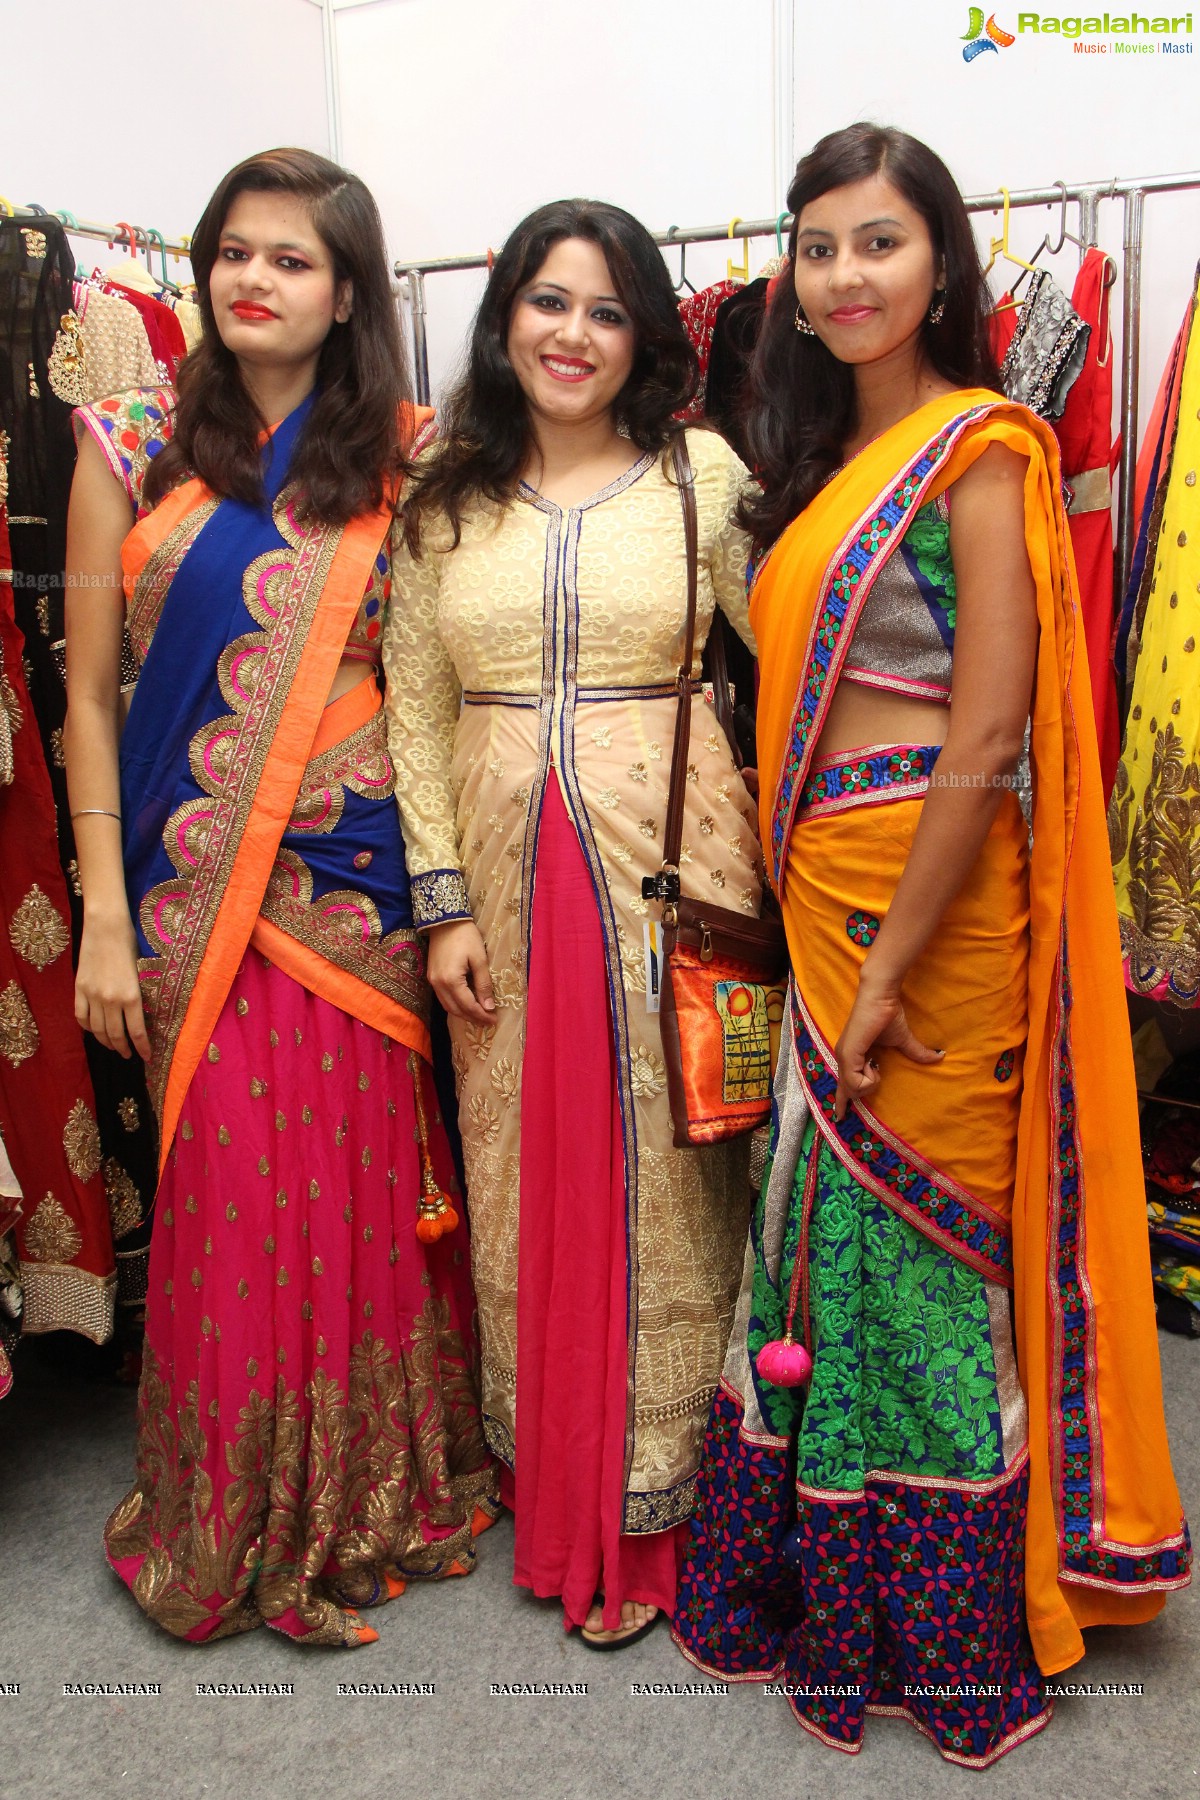 Harini launches Fashion Unlimited - A Lifestyle Exhibition in Hyderabad